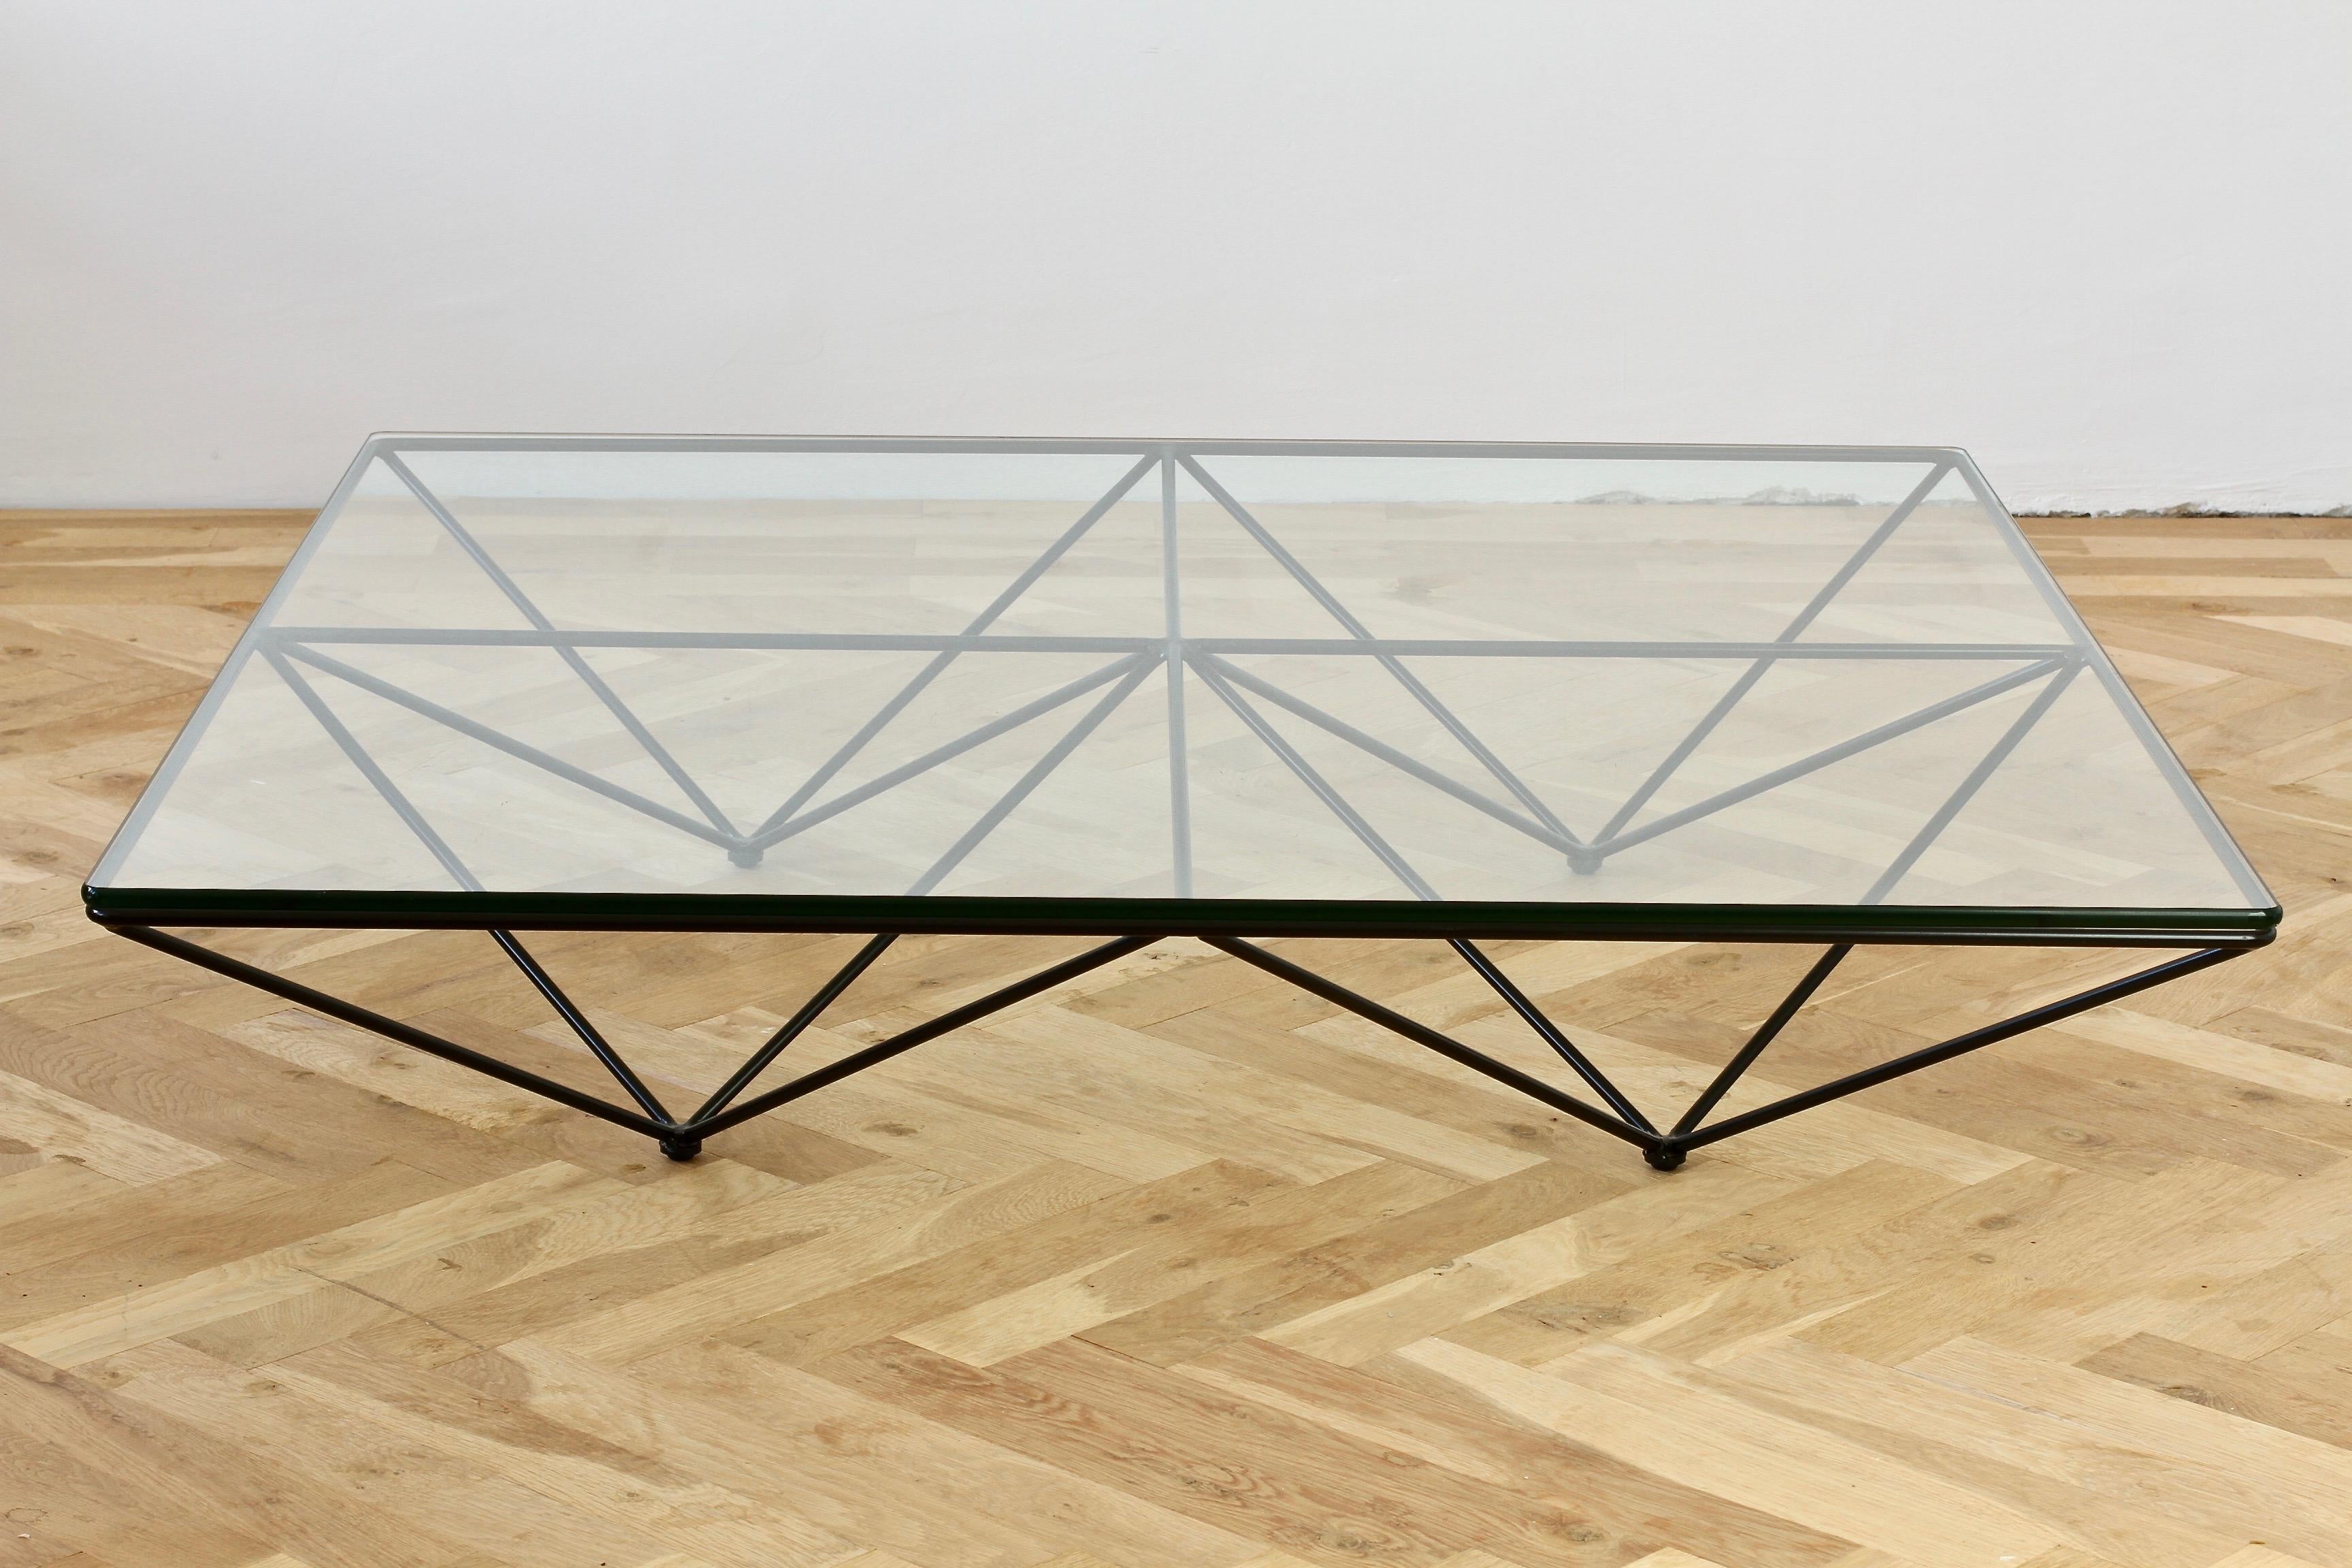 Paolo Piva for B&B Itlaia 'Alanda' low coffee table, 1982. The modernist and minimalist design is simply fantastic the rounded edged clear glass tabletop sits on top of the bold, black painted, geometric steel metal frame which blends so well with a